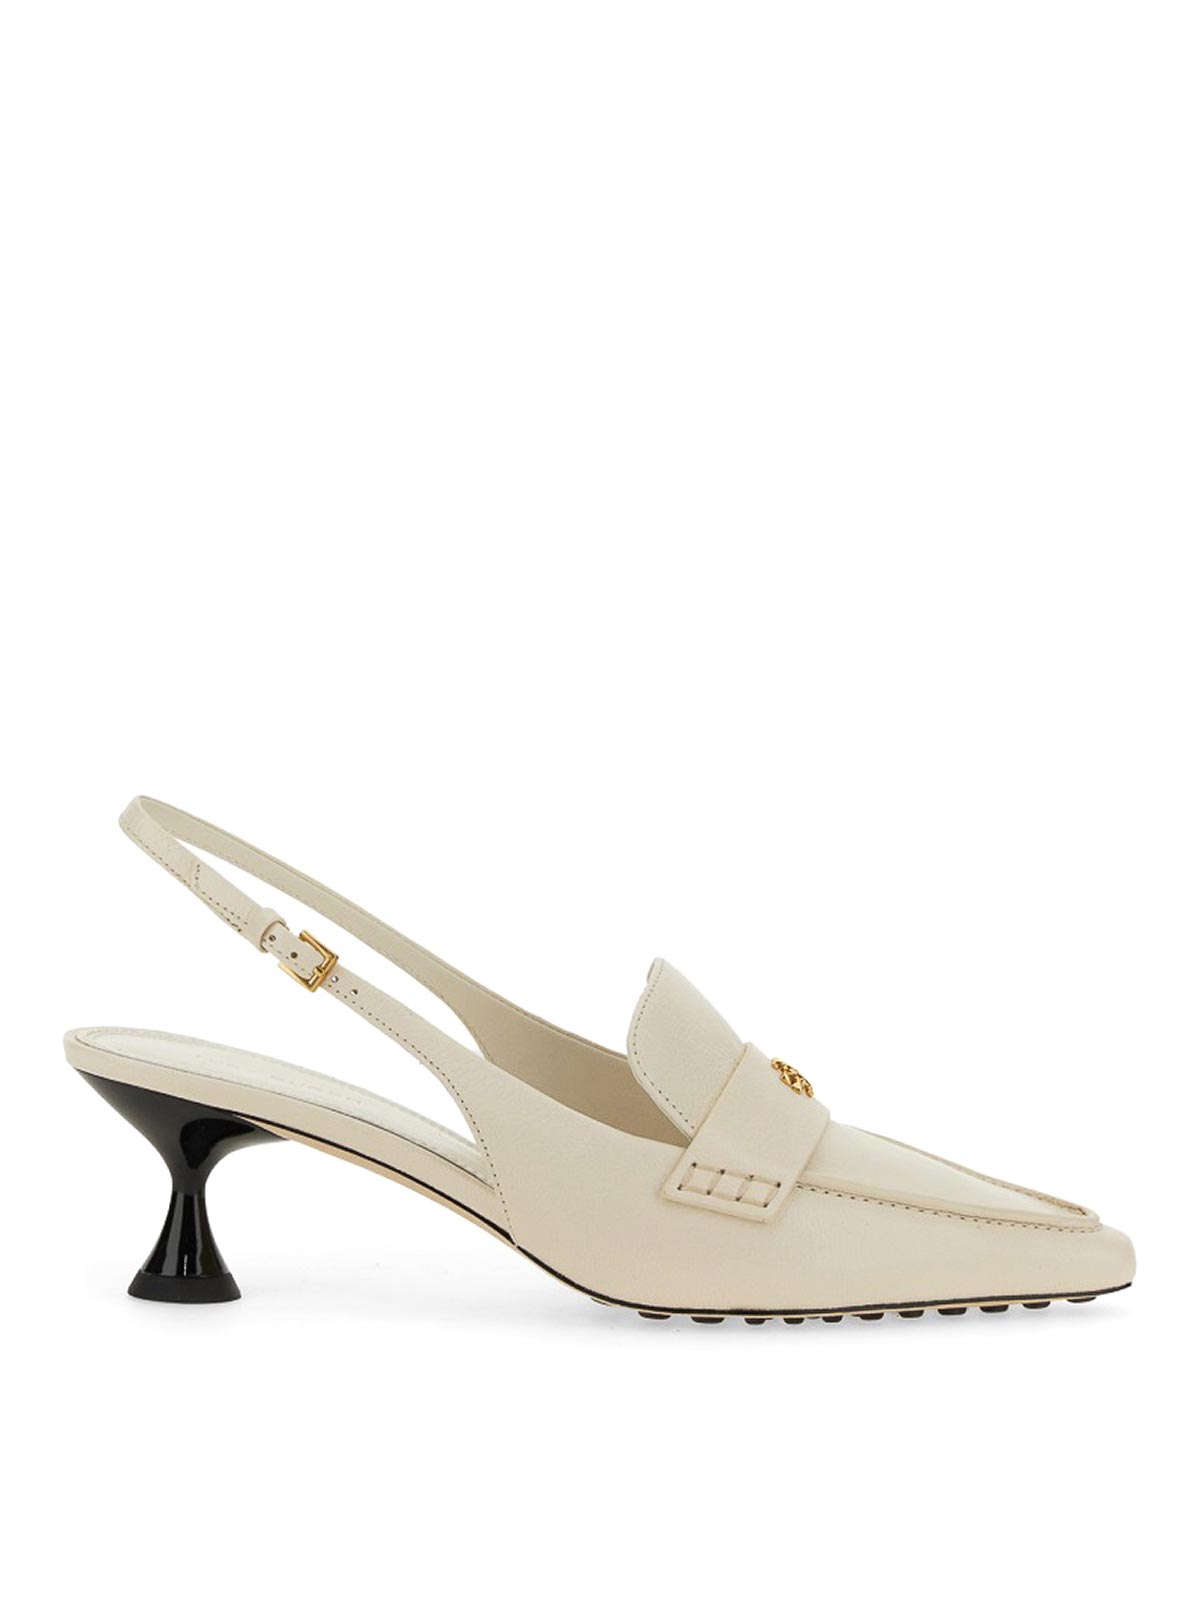 Shop Tory Burch Leather Sandal In White